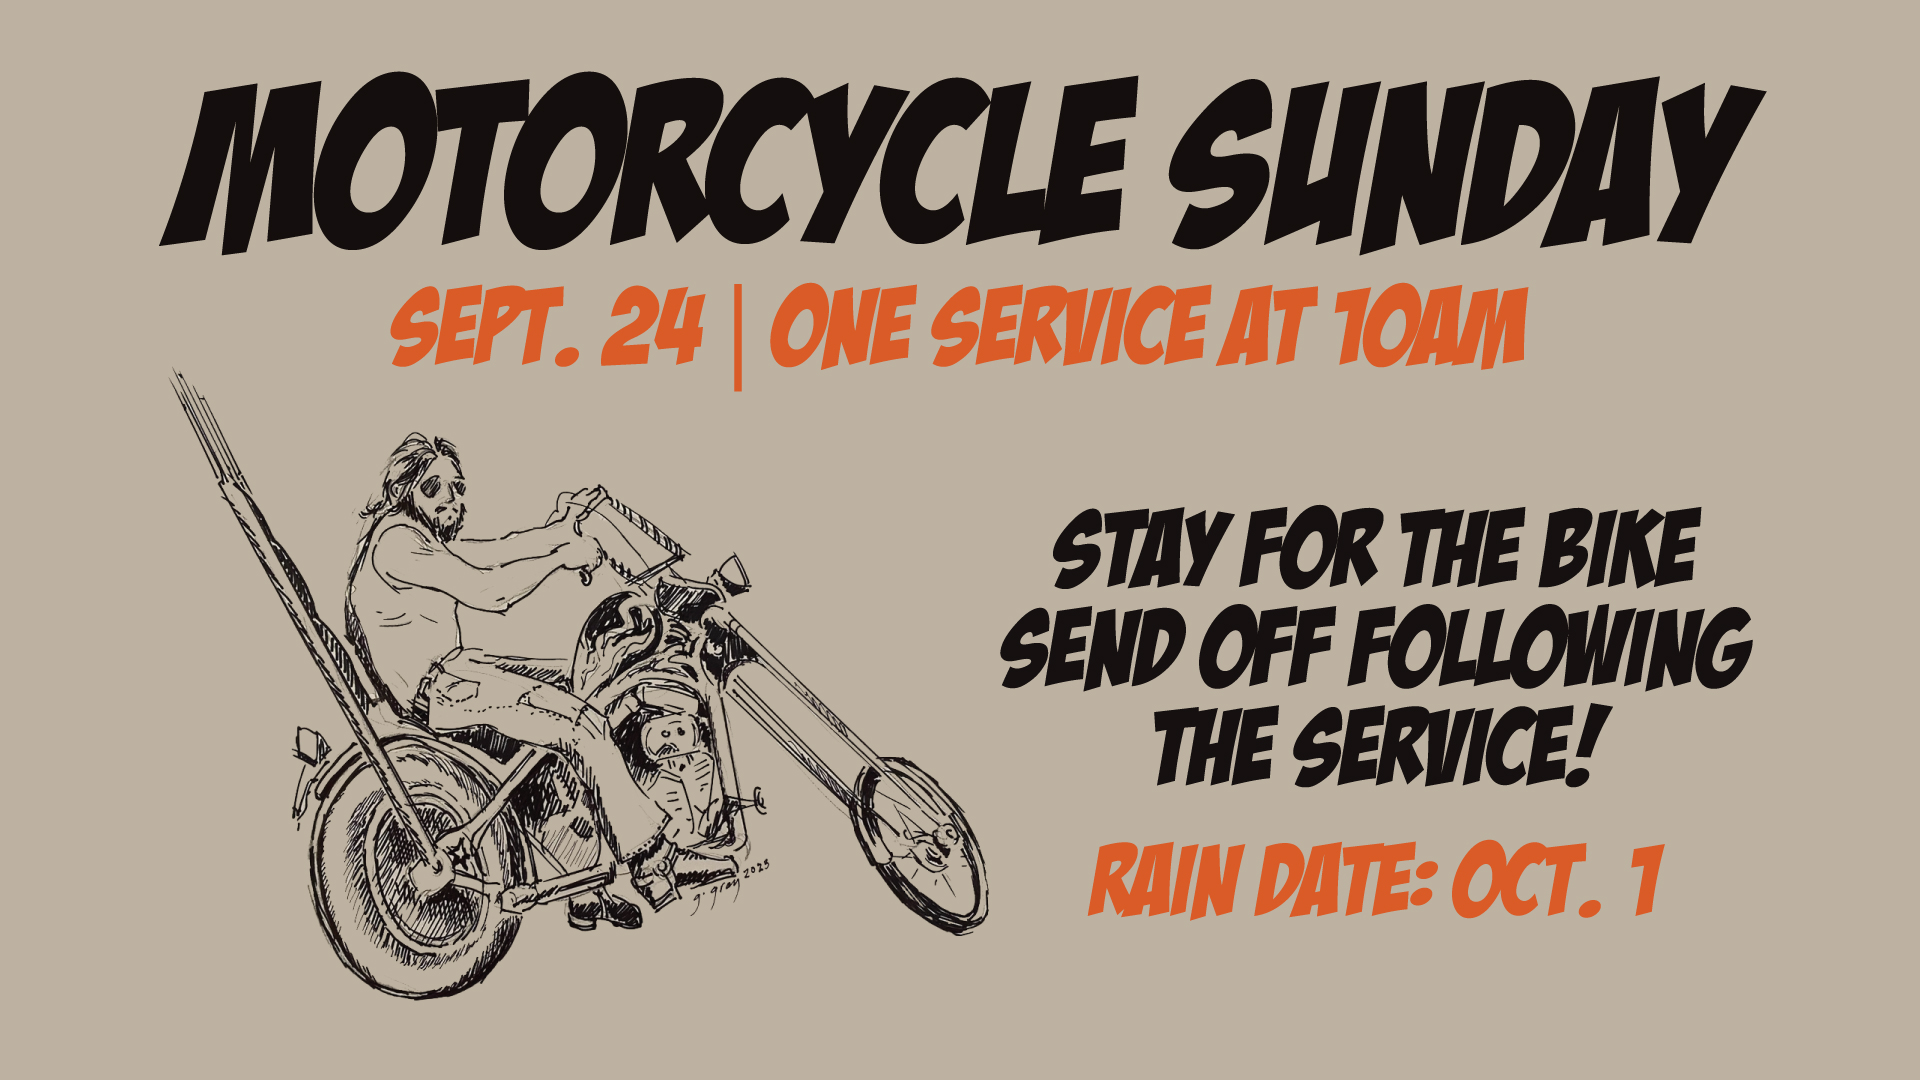 Motorcycle Sunday | 9/24 | One service at 10AM | Stay for the bike send off following the service | Rain date: 10/1